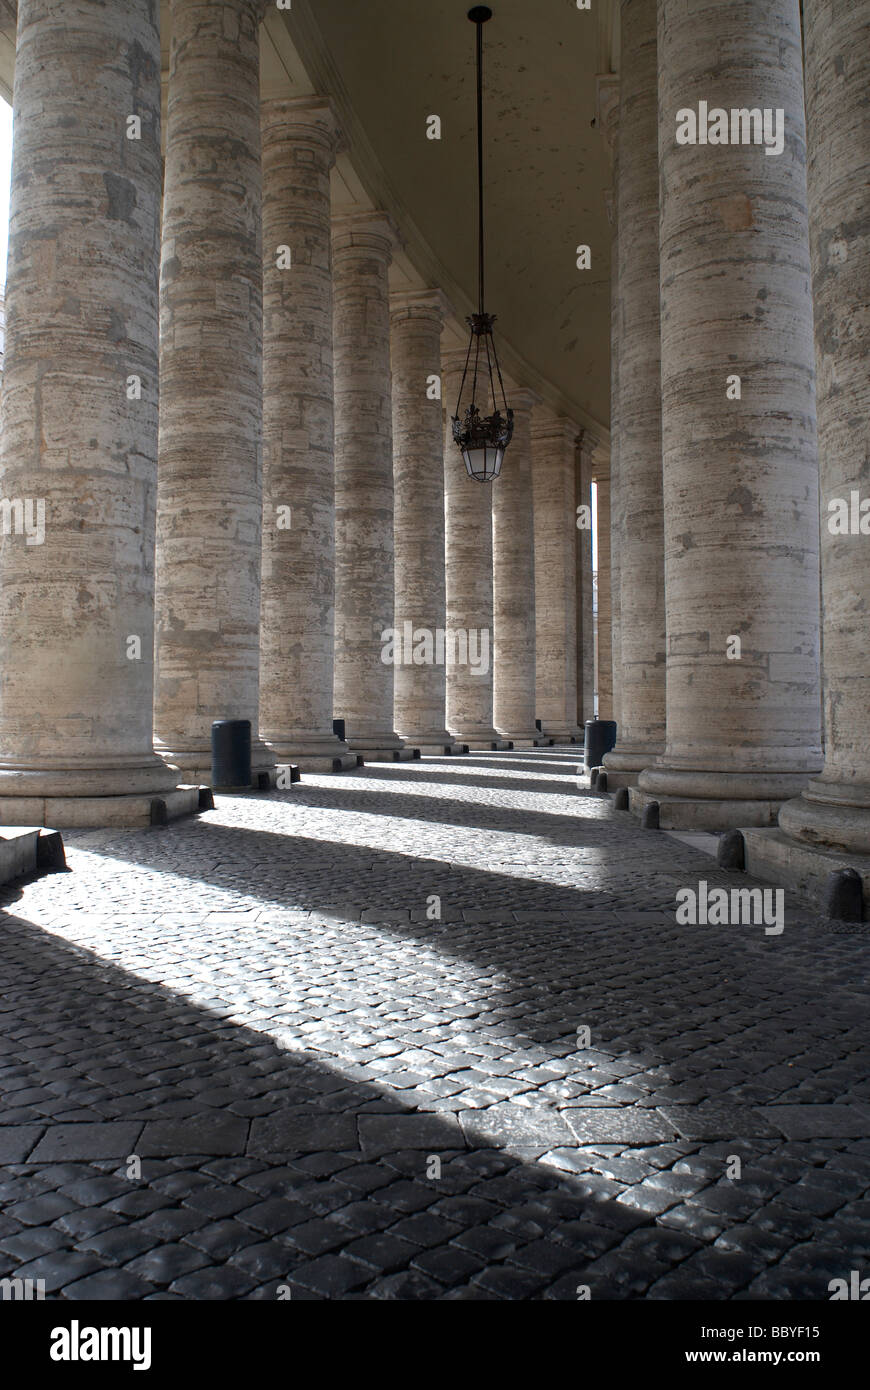 Colonnade at St Peter's Basilica, Rome Stock Photo